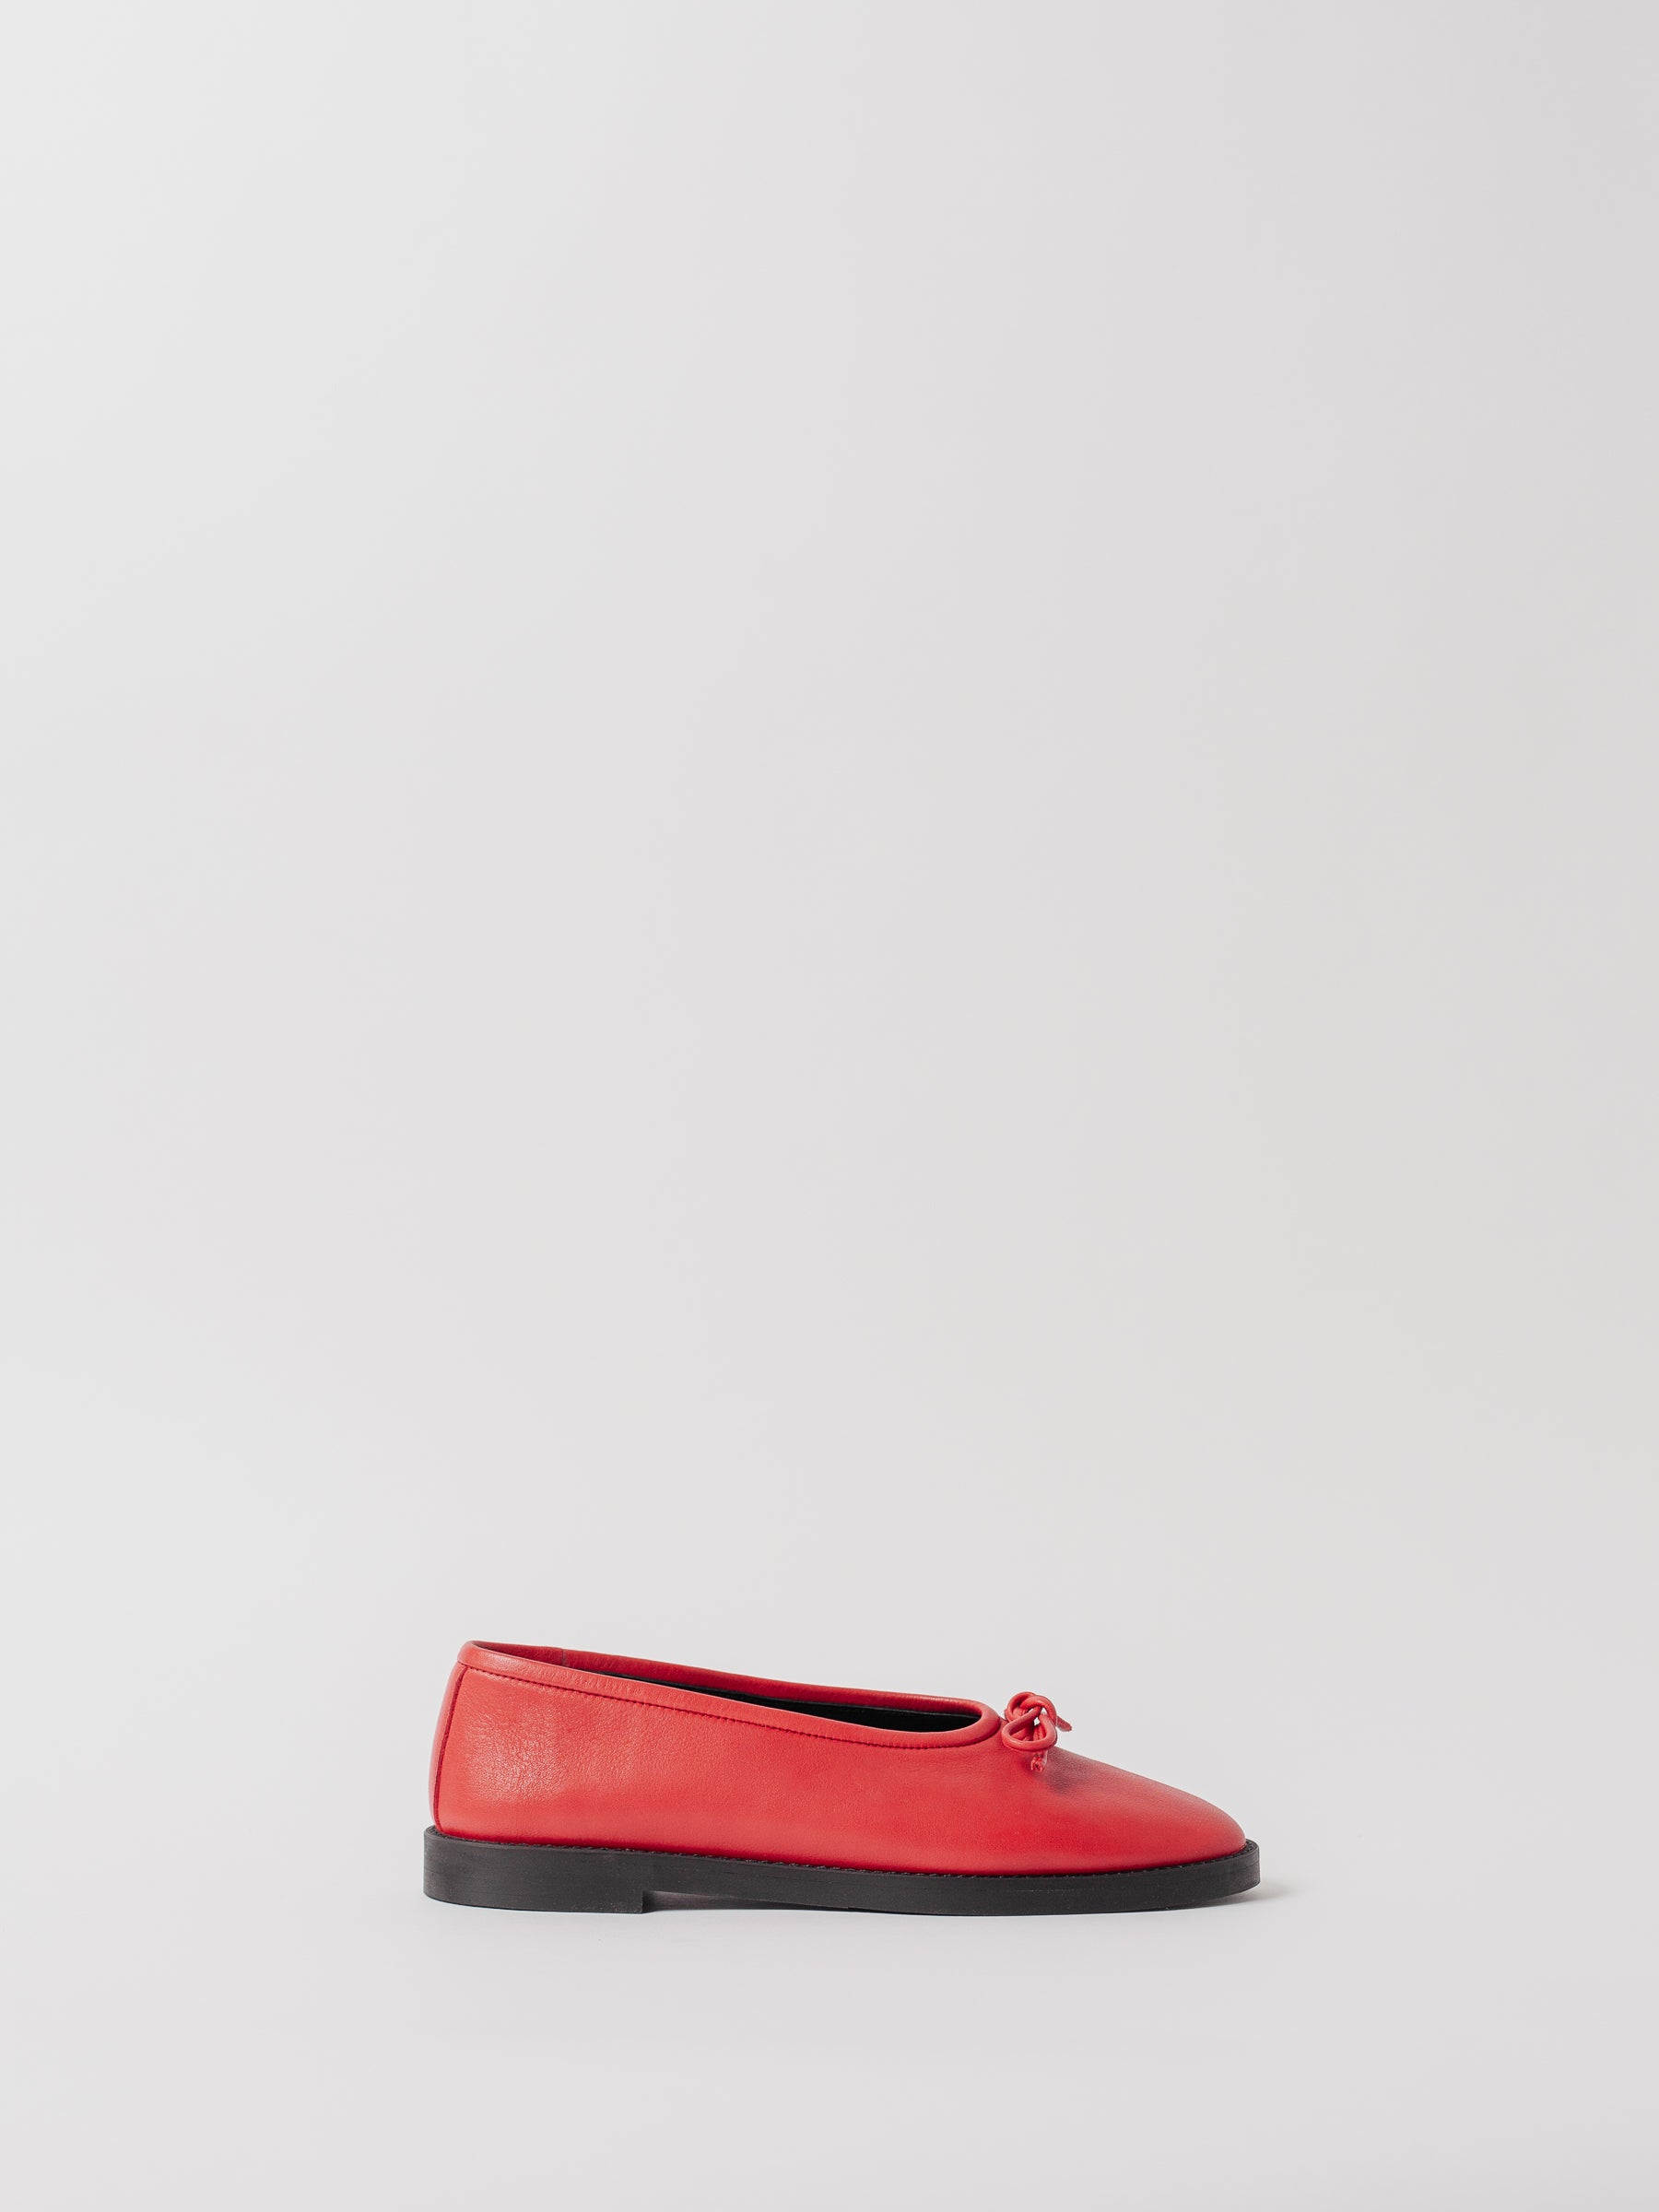 THE COCO FLAT RED